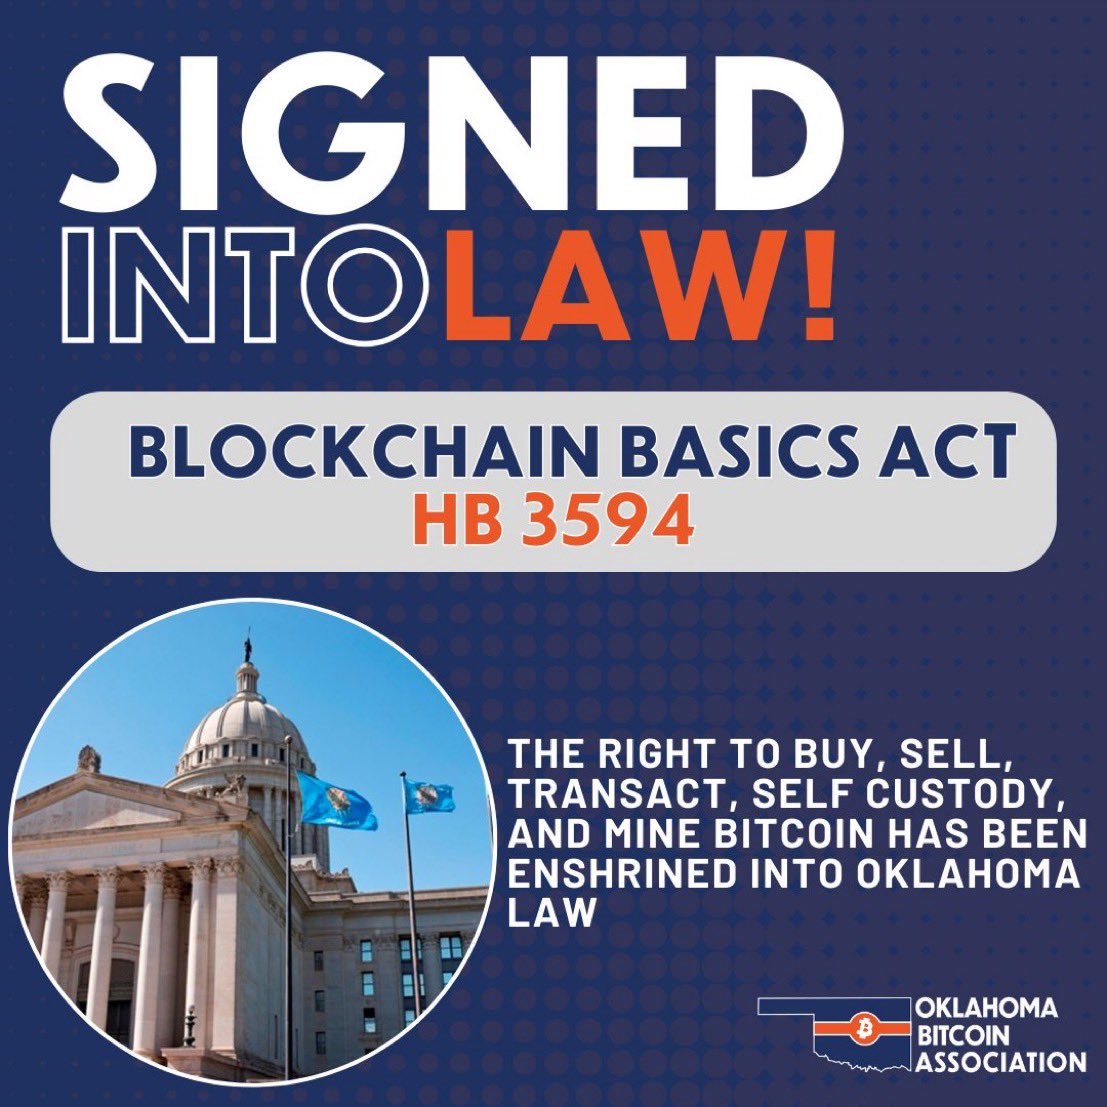 JUST IN: Governor Kevin Stitt of Oklahoma signs HB3594 into law.

This historic step makes Oklahoma the first state to formally recognize and protect the rights of its citizens to run a node, mine, and self-custody #Bitcoin